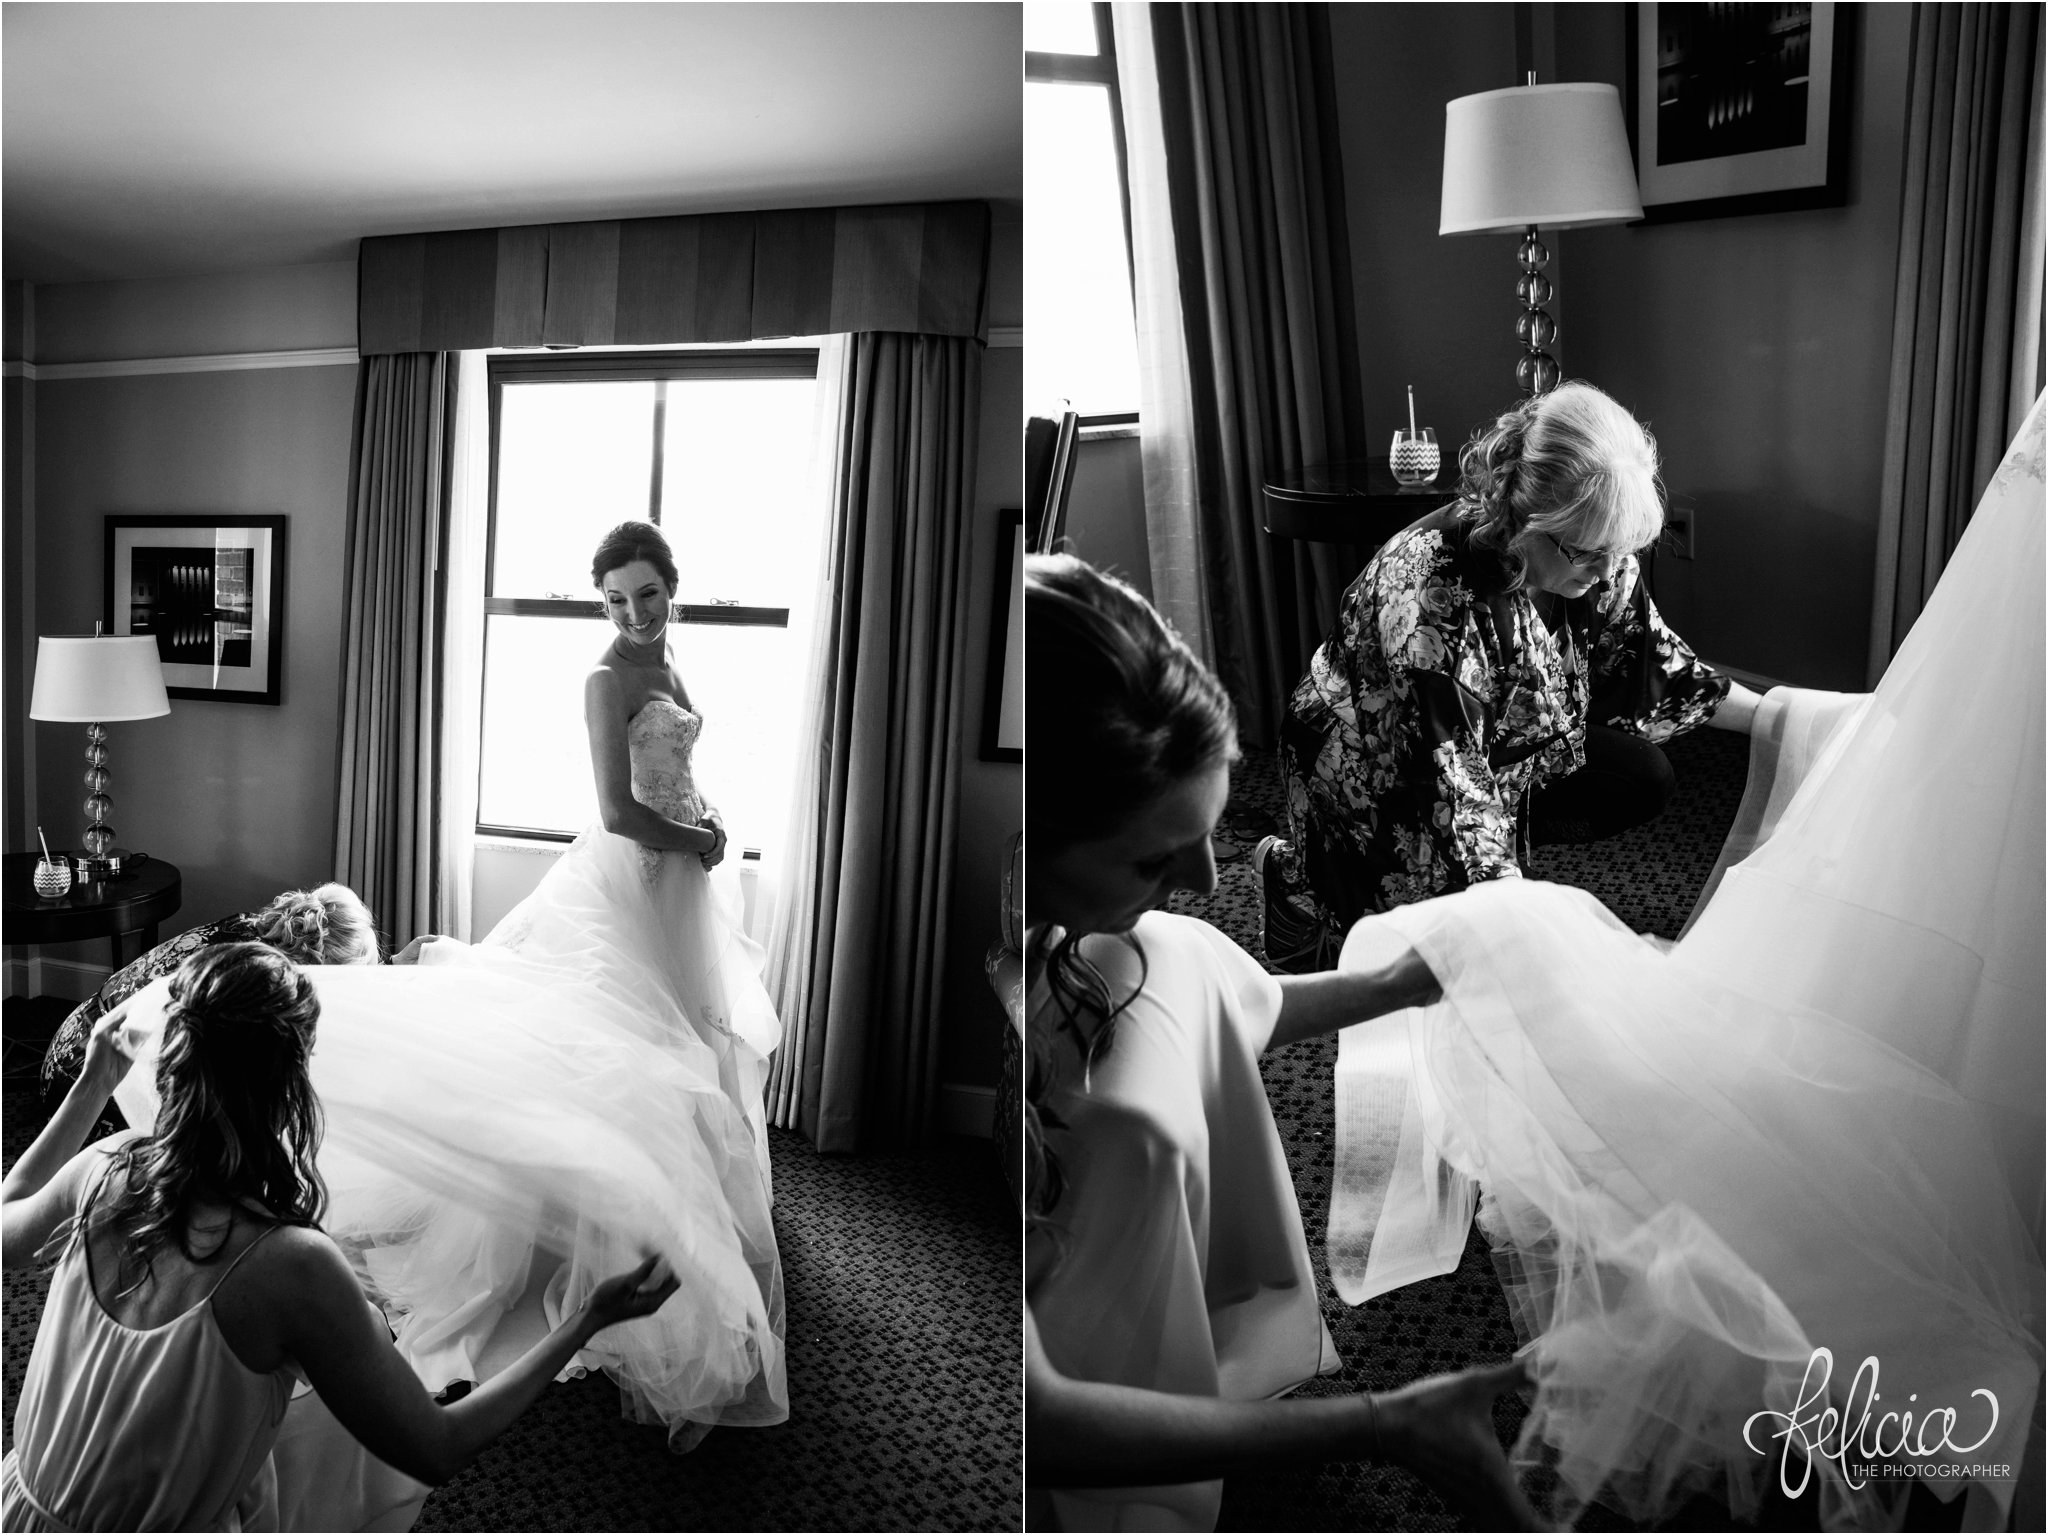 Grace and Holy Trinity Cathedral Wedding Photos | Kansas City | Bride Getting Ready | Images by www.feliciathephotographer.com